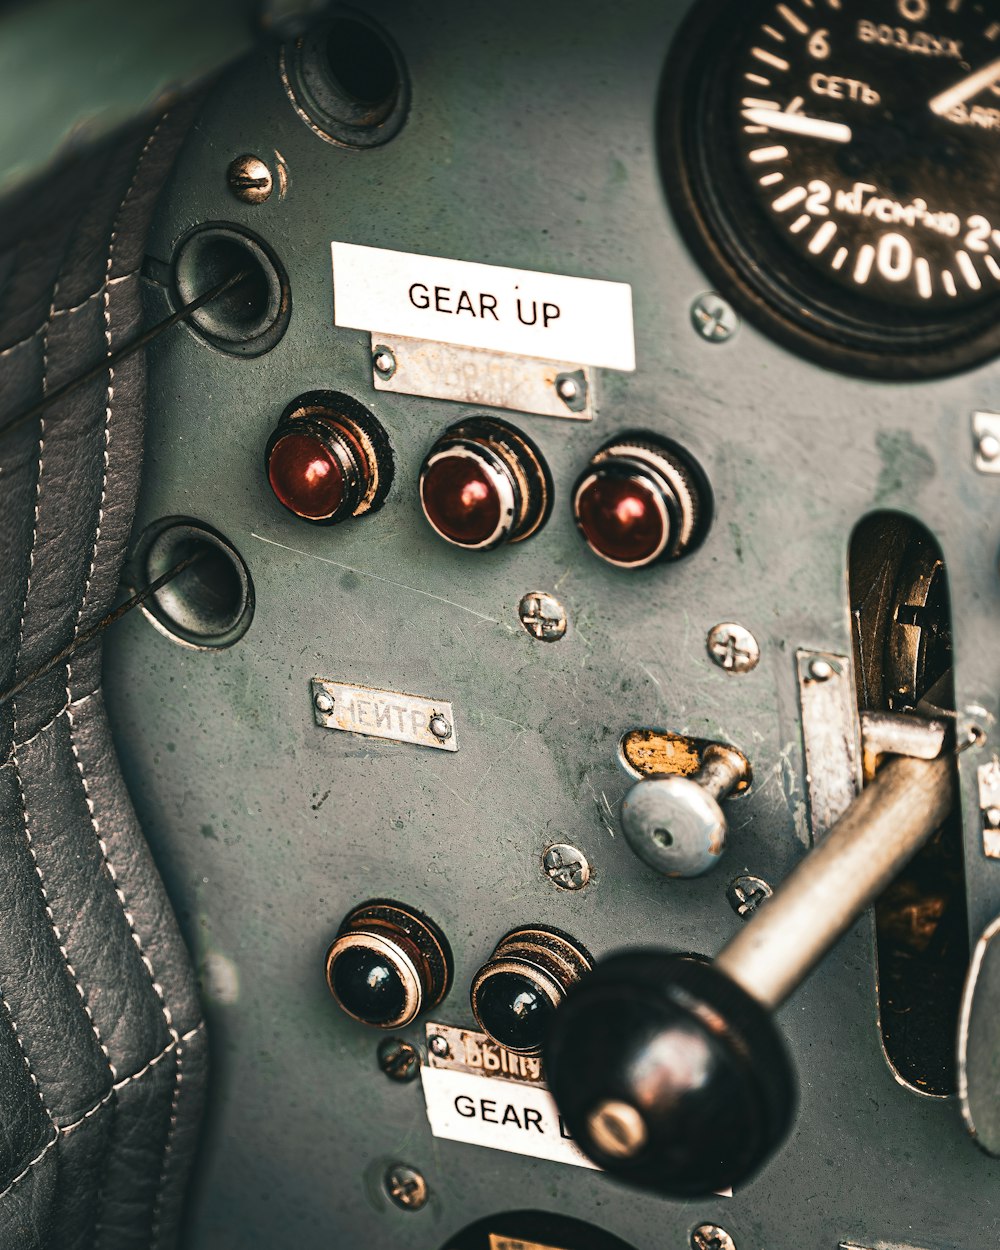 a close up of a control panel of a plane